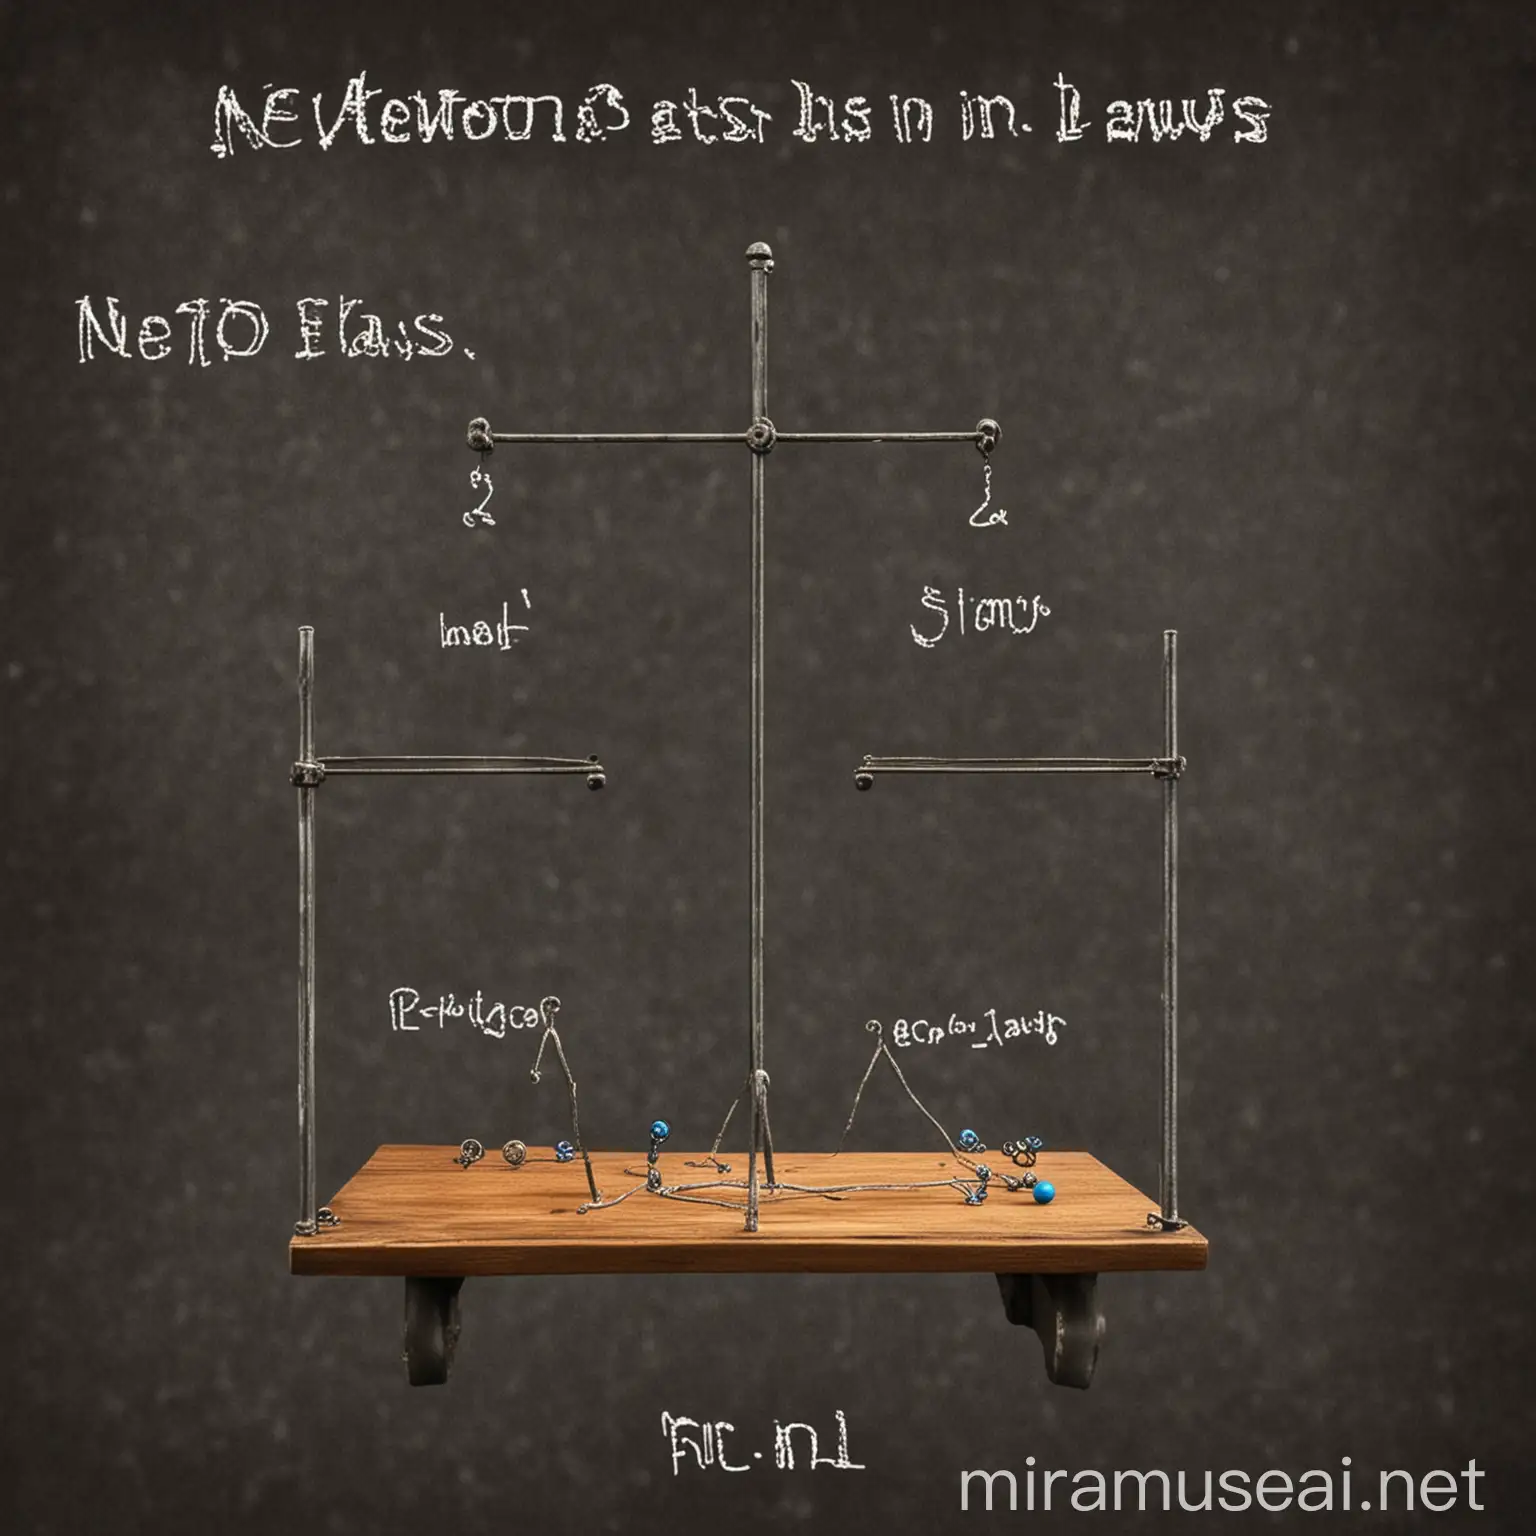 High School Physics Illustration of Newtons Laws in Action